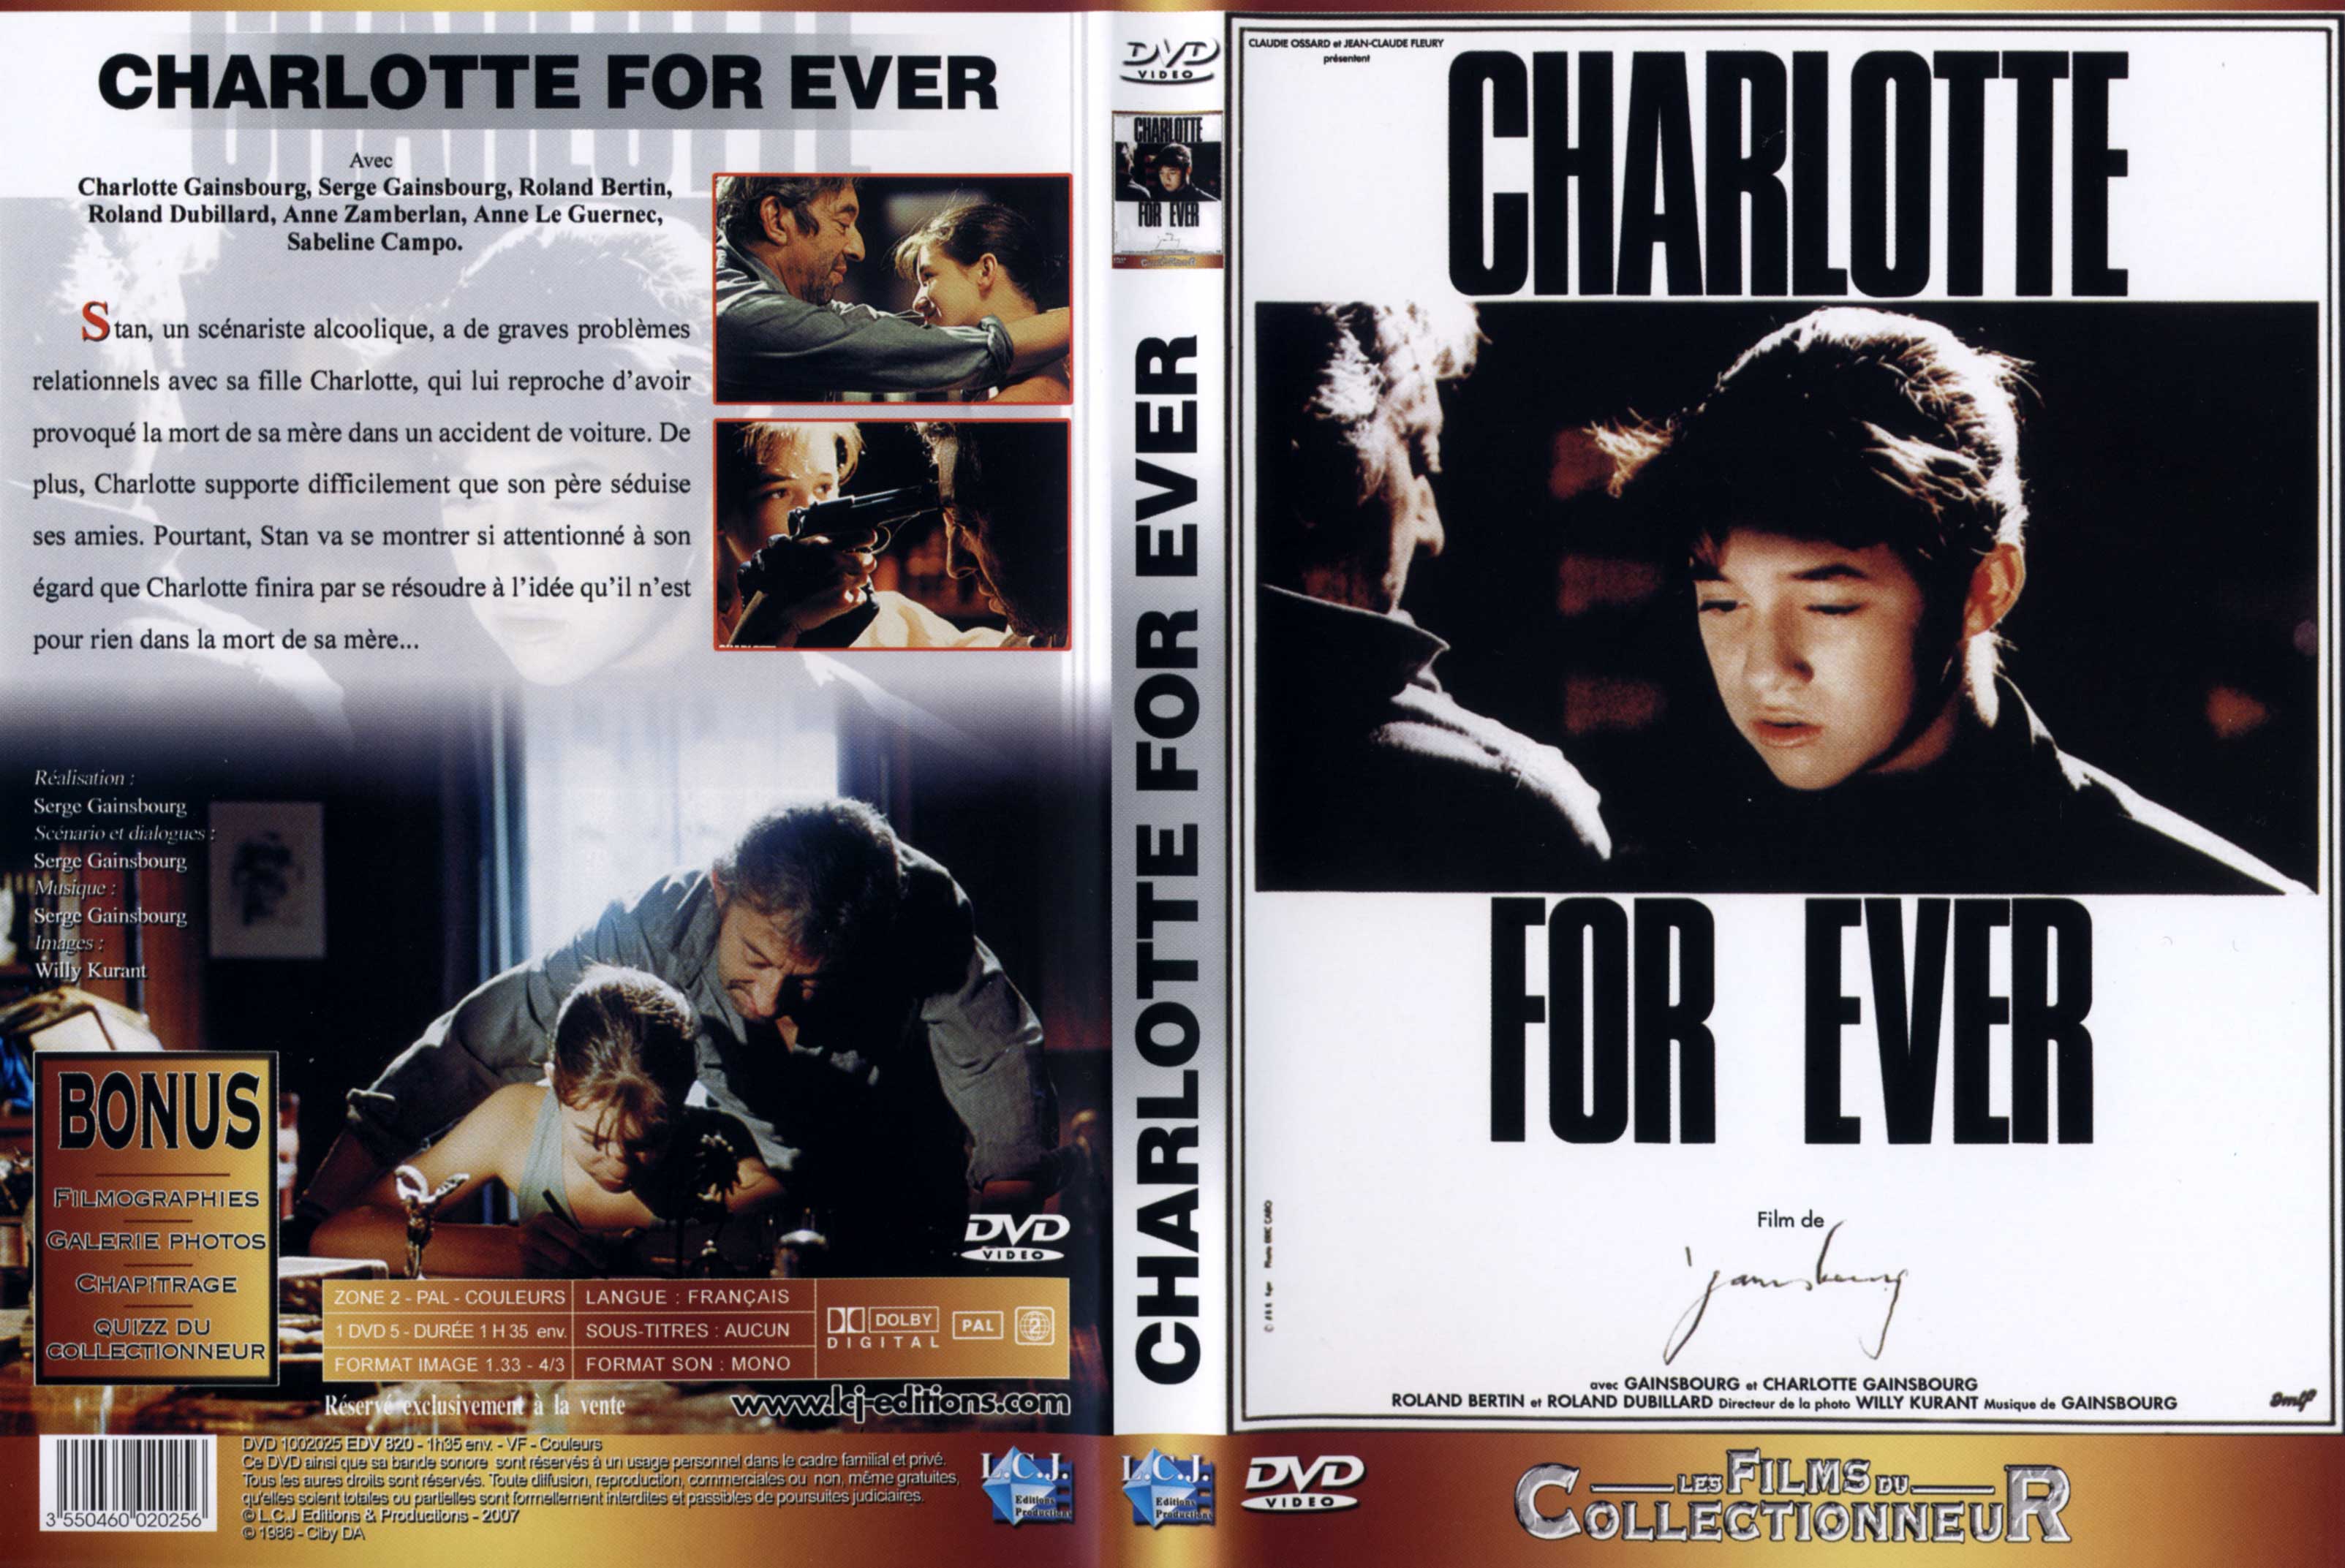 Jaquette DVD Charlotte for ever